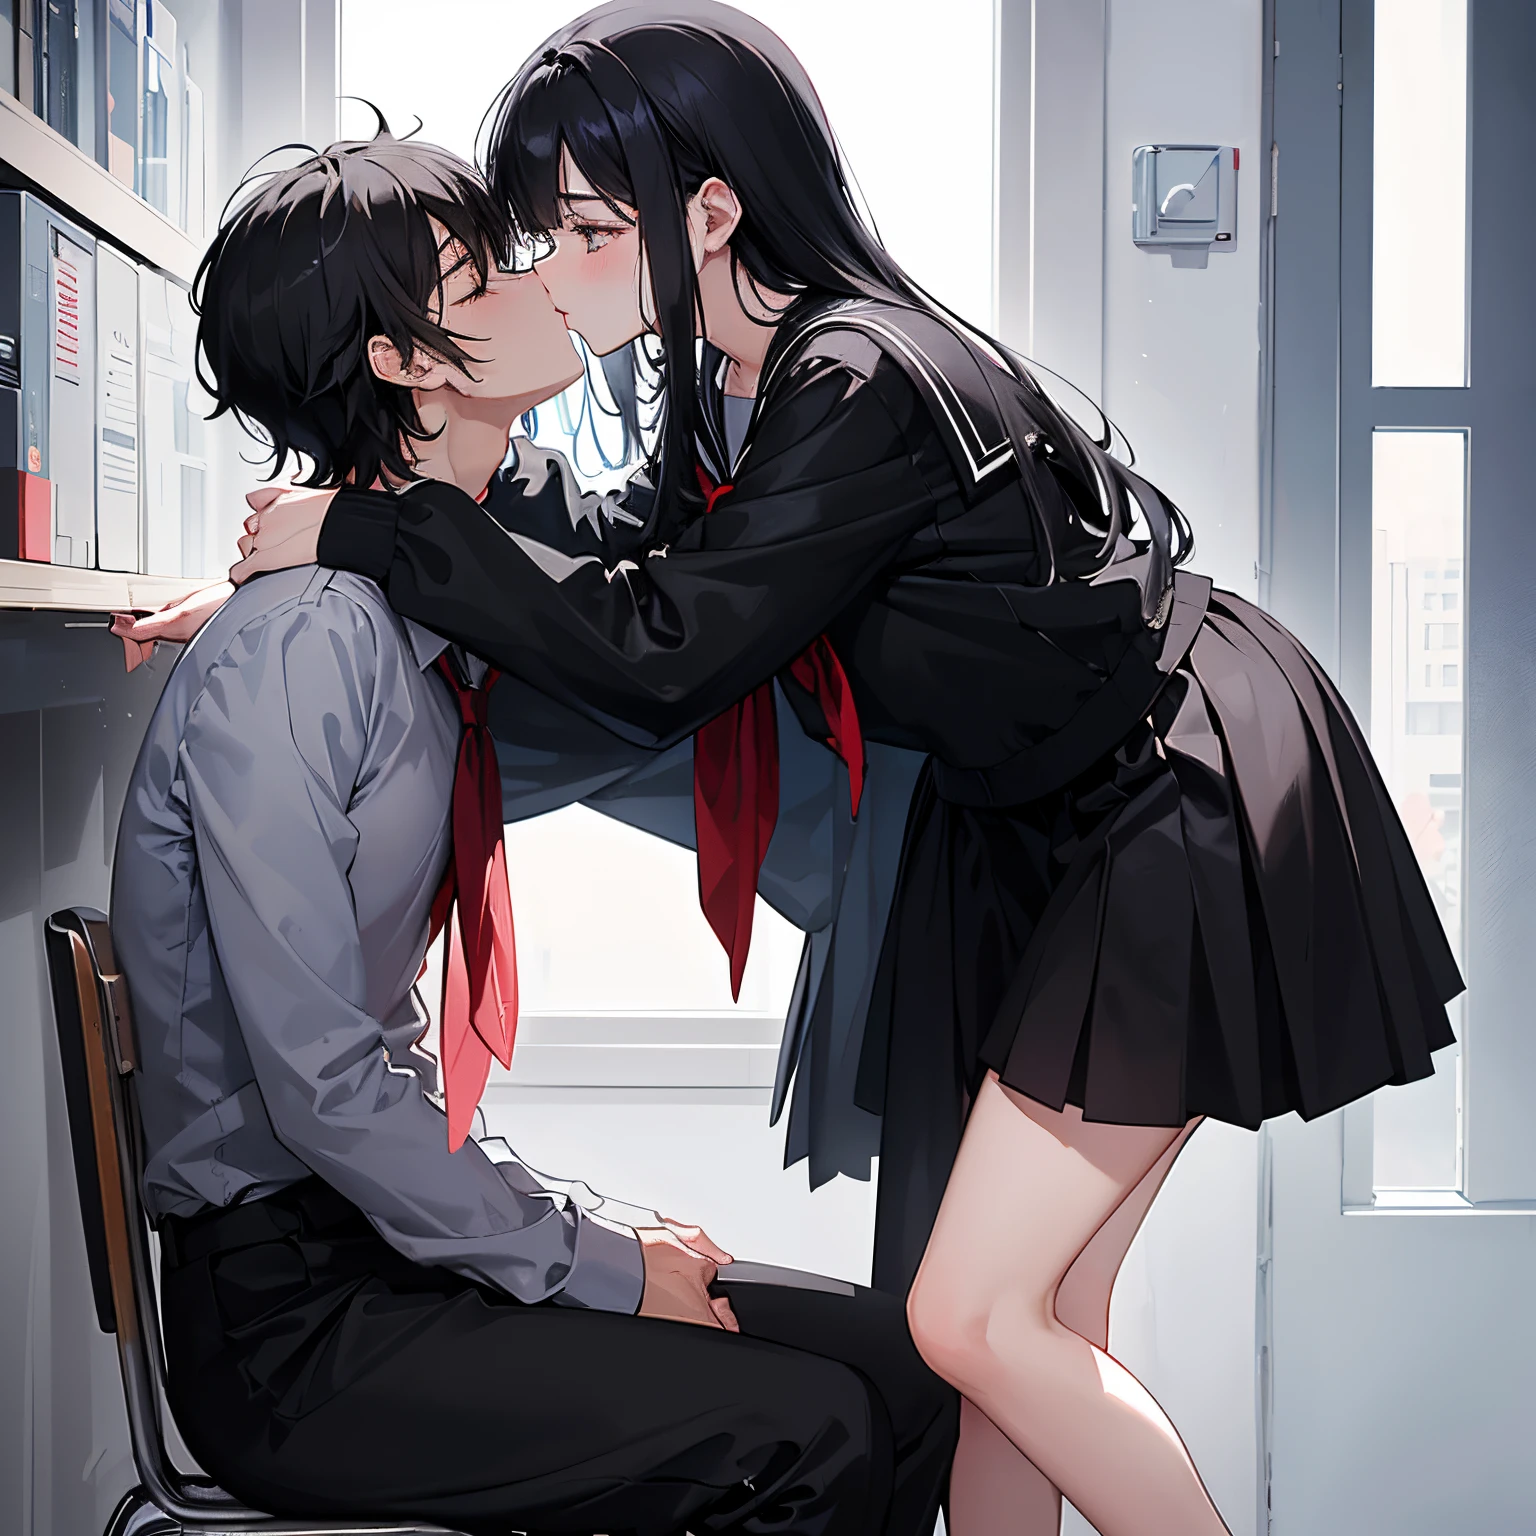 Generate a romantic and tender scene depicting male and female, sharing a passionate kiss. Set the atmosphere with evocative details such as the location, time of day, and any relevant emotions or thoughts running through the characters's minds.("a handsome, tall height, flirty, male  with black and messy,  short hair wearing a white school uniform) sharing kiss with (a beautiful, short height, innocent female with black and semi long hair wearing school uniform) sharing kiss to eachother wearing , sharing kisses, male kisses at female's lips, male is tall and female is short and both are sharing kiss with eyes closed tightly, height difference , he leans down and kisses at her lips